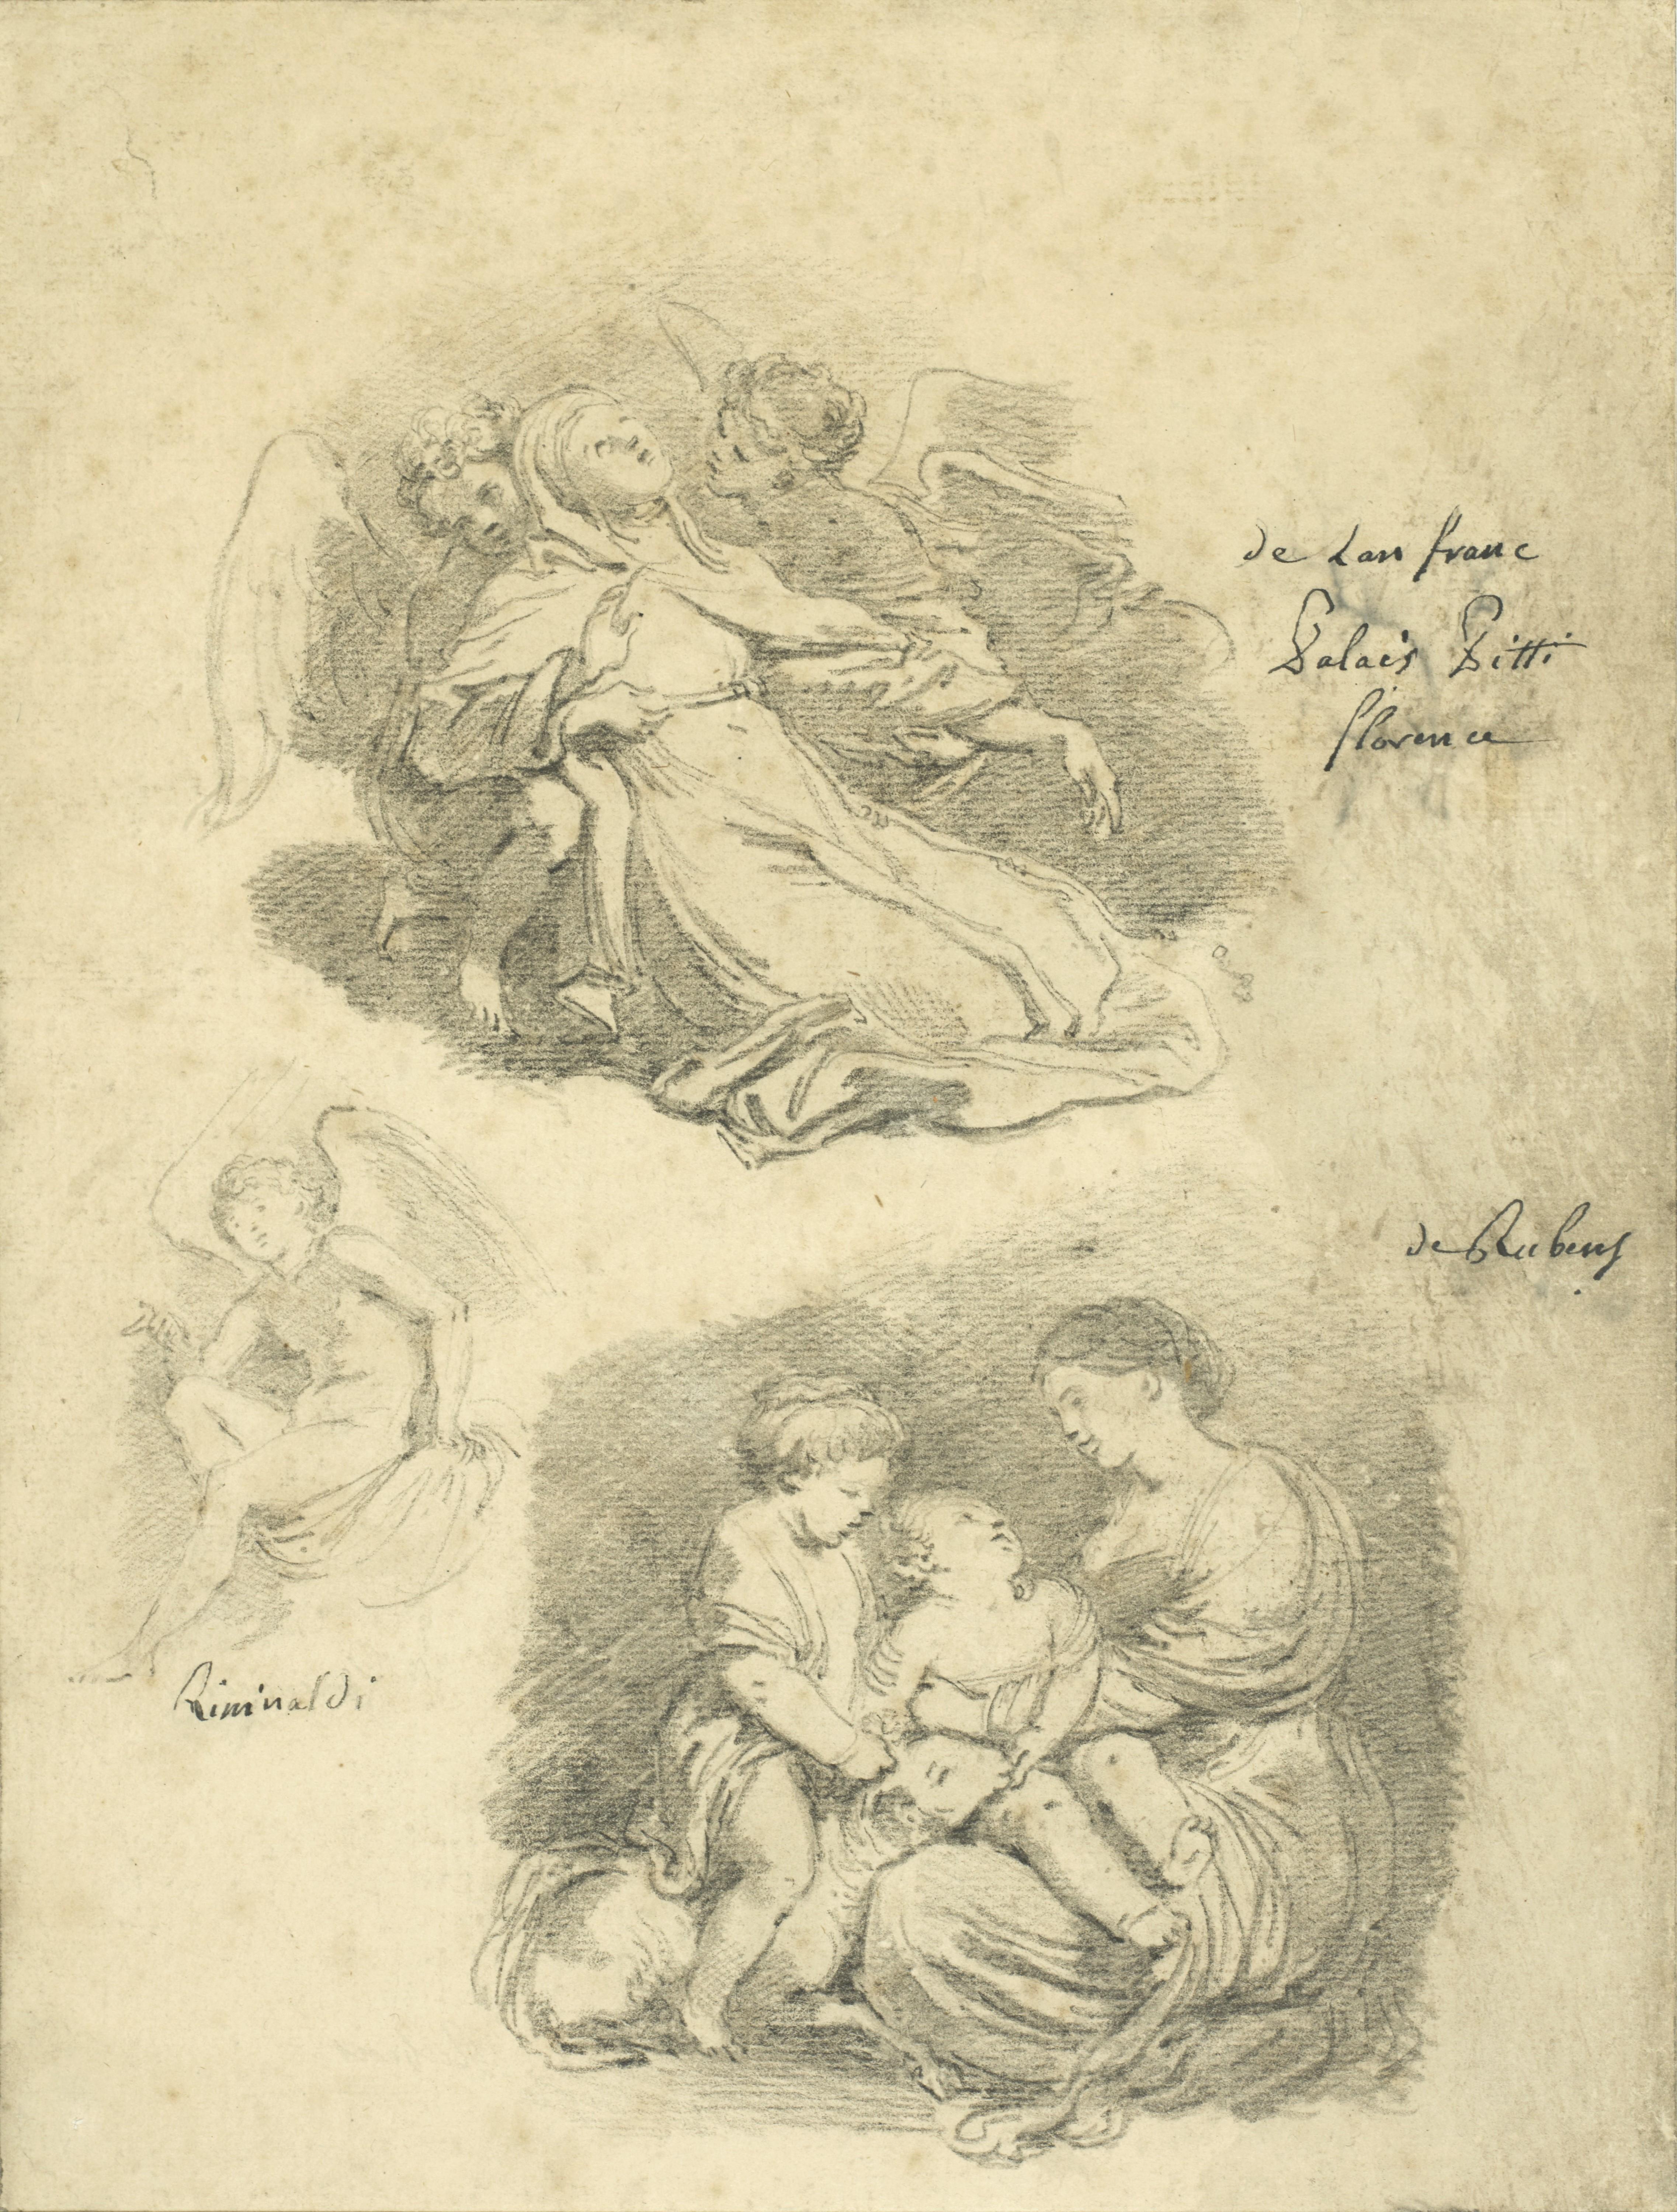 This brilliant study sheet, of which we present here a counterproof, is a souvenir of Fragonard's return journey from Italy. Between April and September 1761, he accompanied the abbot of Saint-Non on his way back to France. Three studies after the